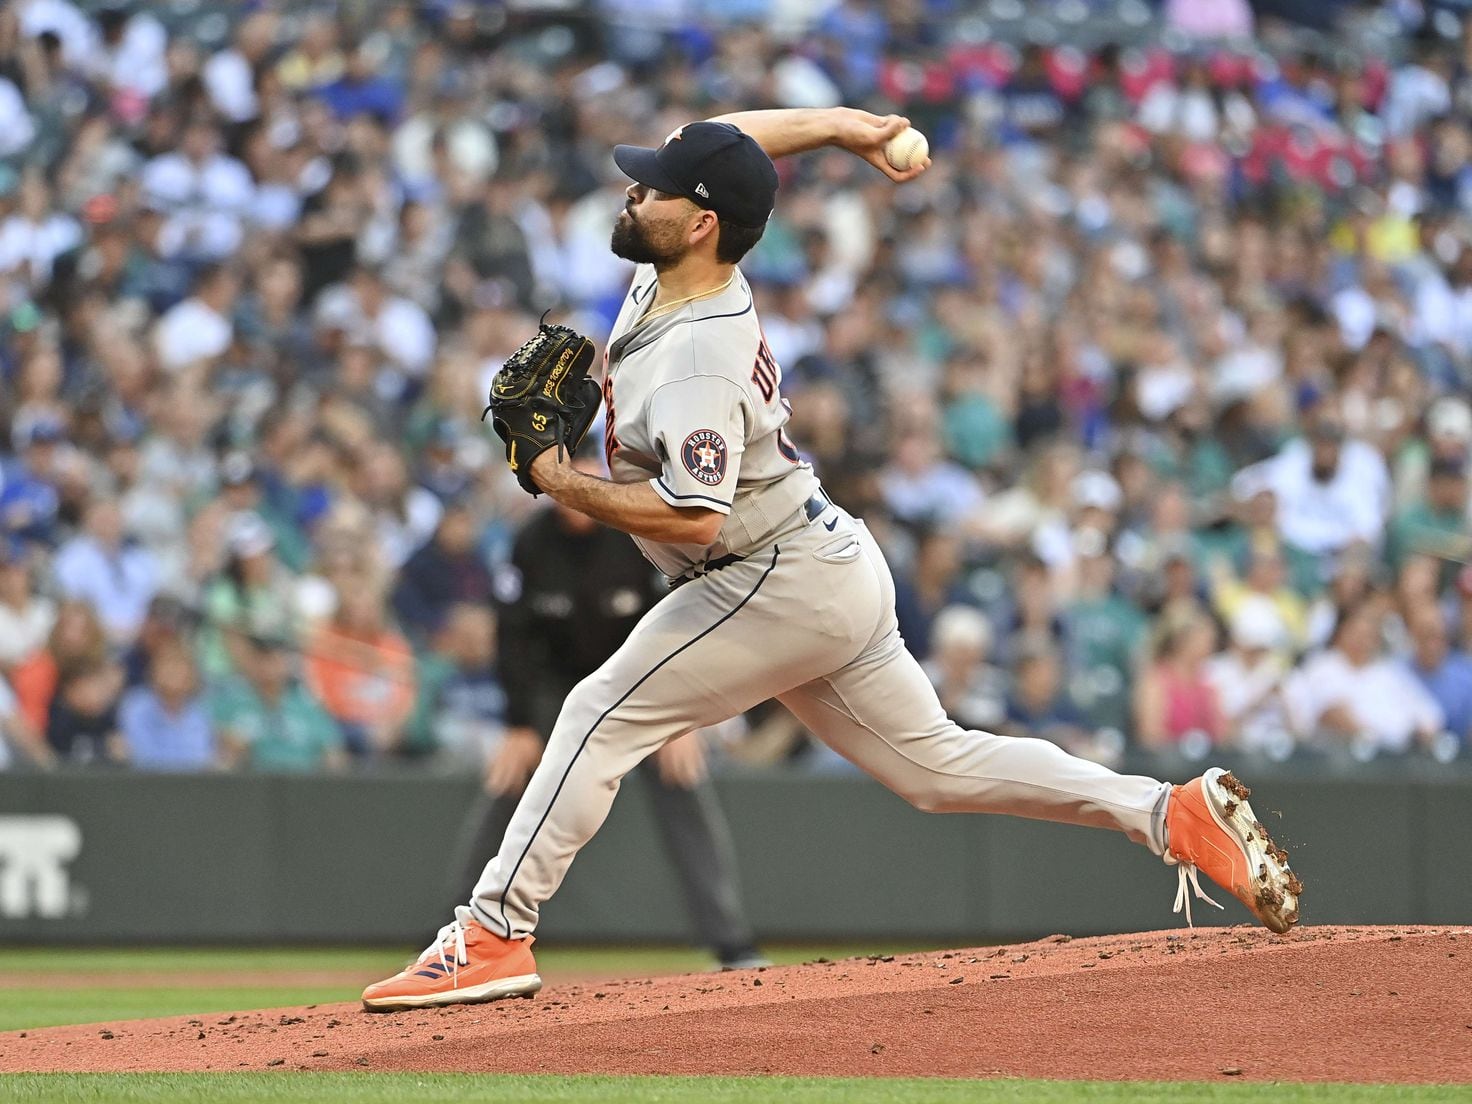 2022 MLB Playoffs: Is this the best Astros pitching staff we've